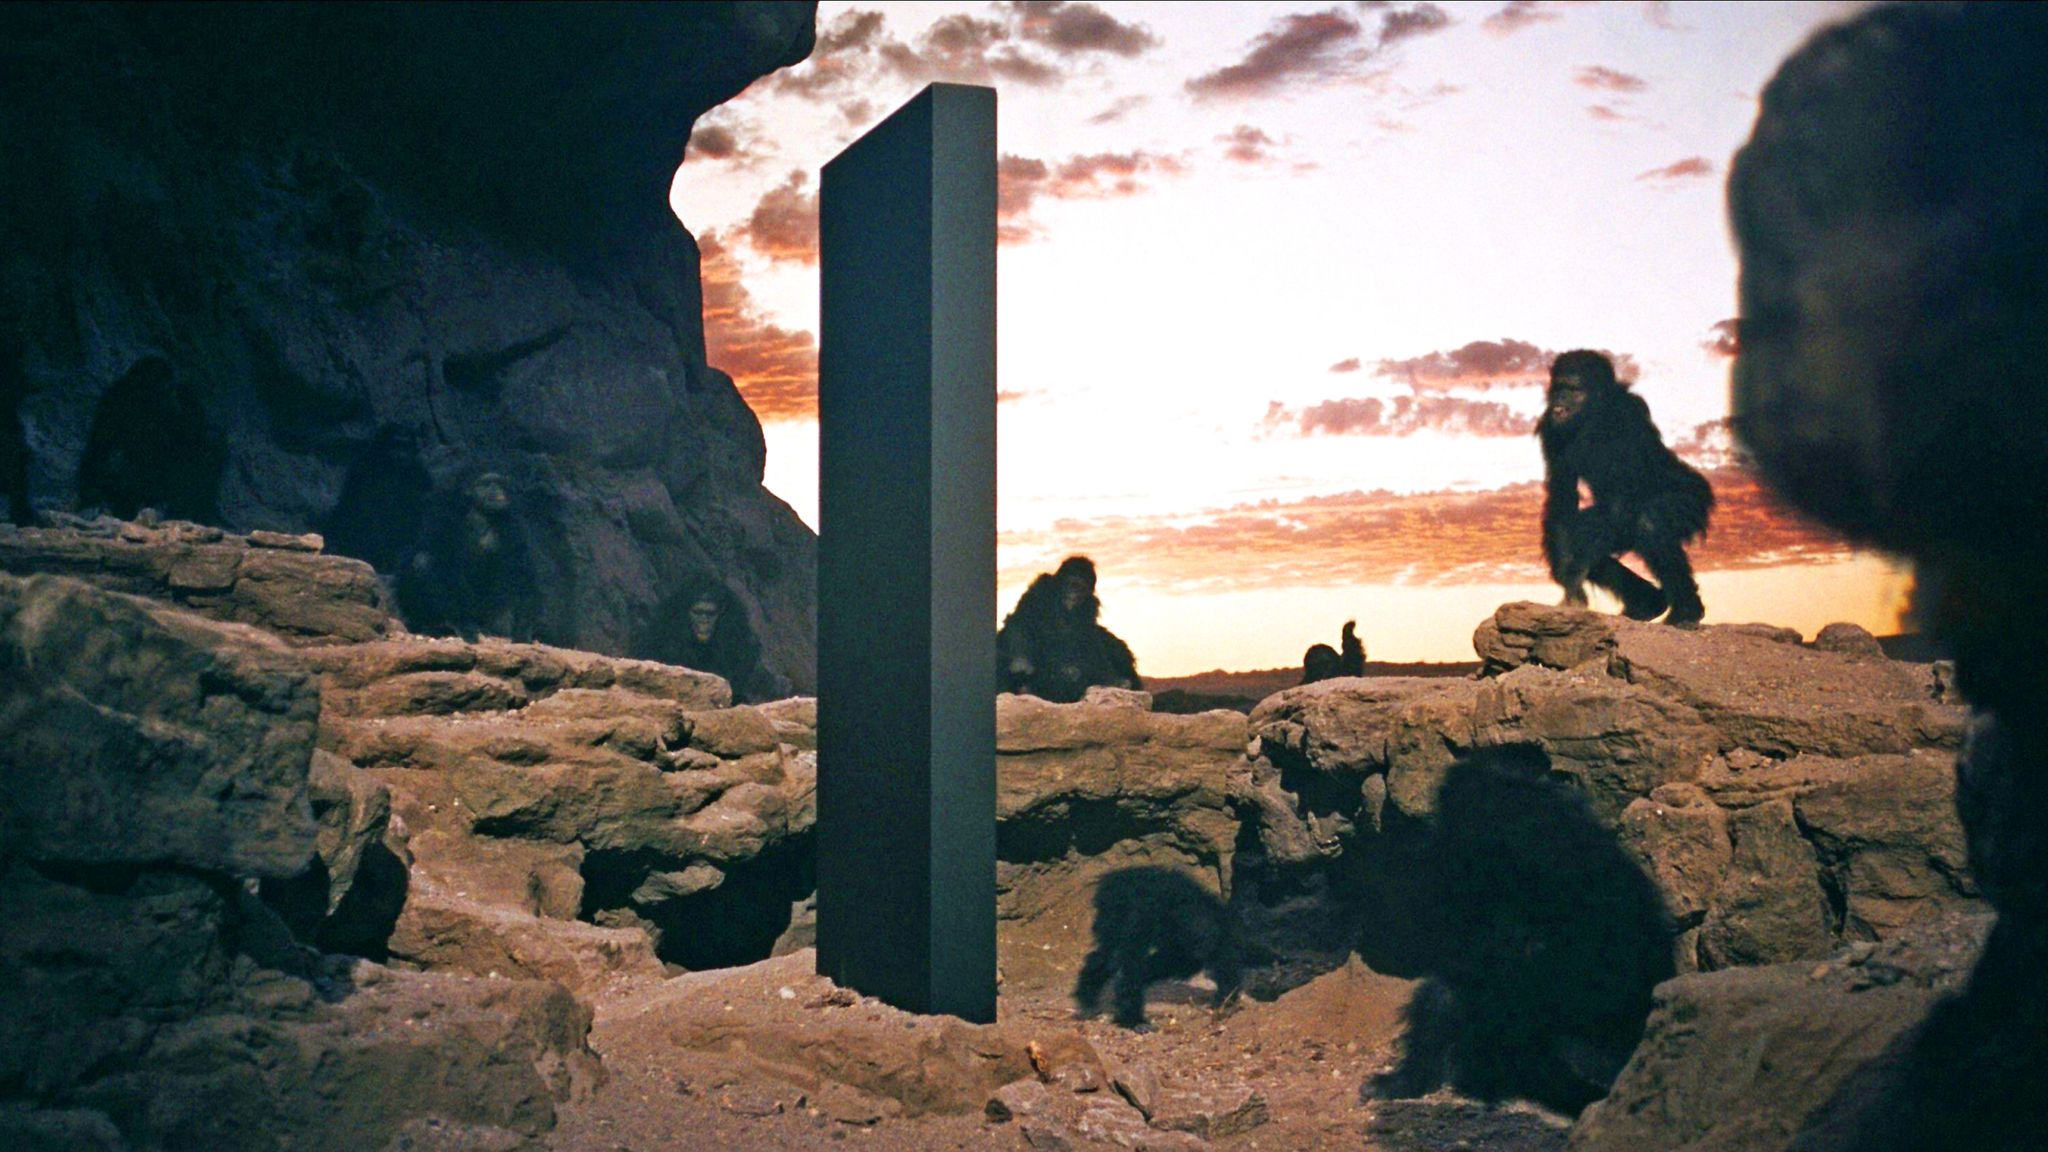 The monolith from 2001: A Space Odyssey.